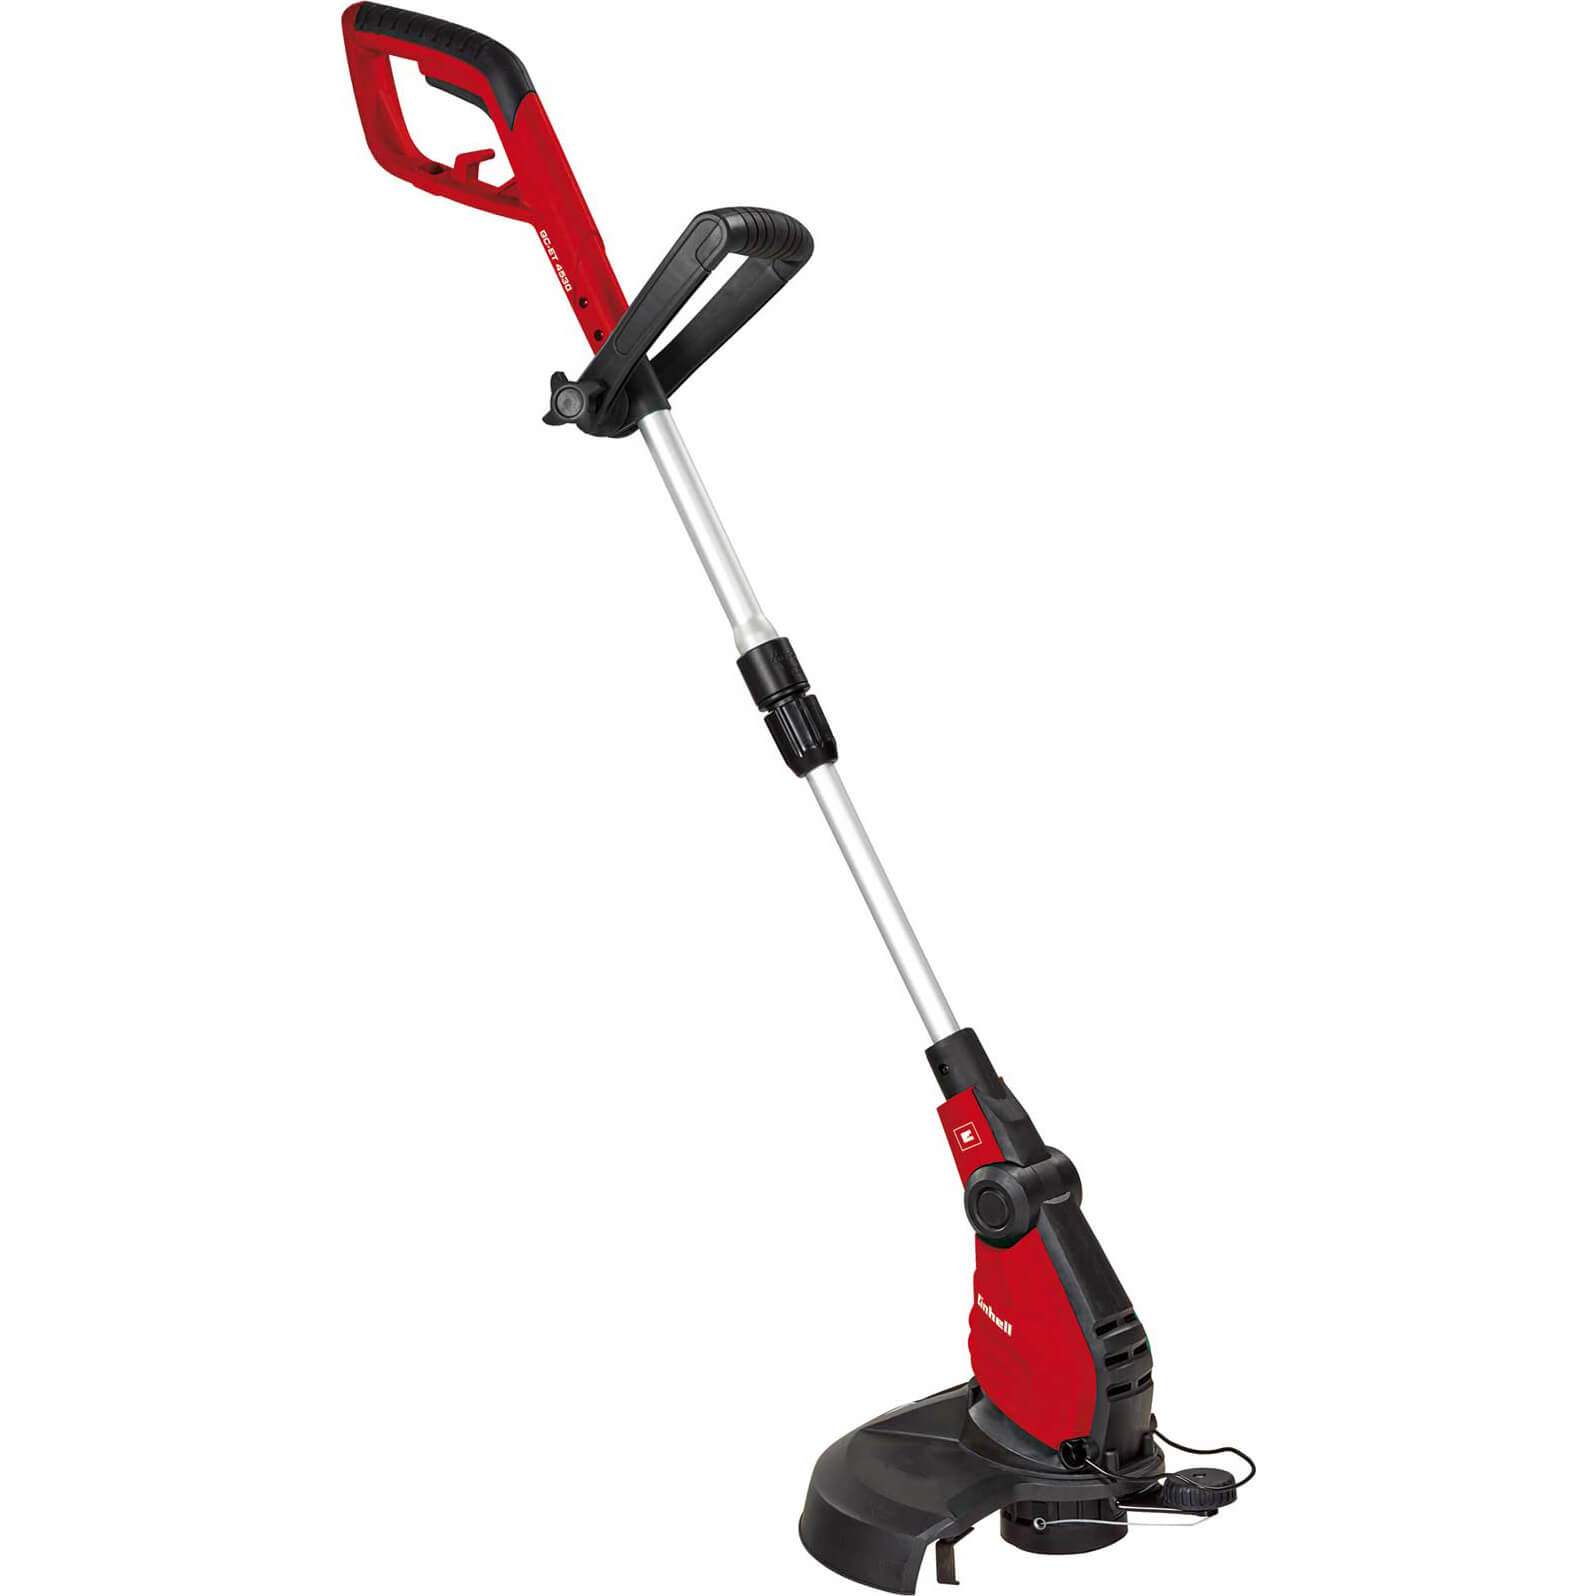 Image of Einhell GC-ET 4530 Electric Telescopic Grass Trimmer and Edger 300mm